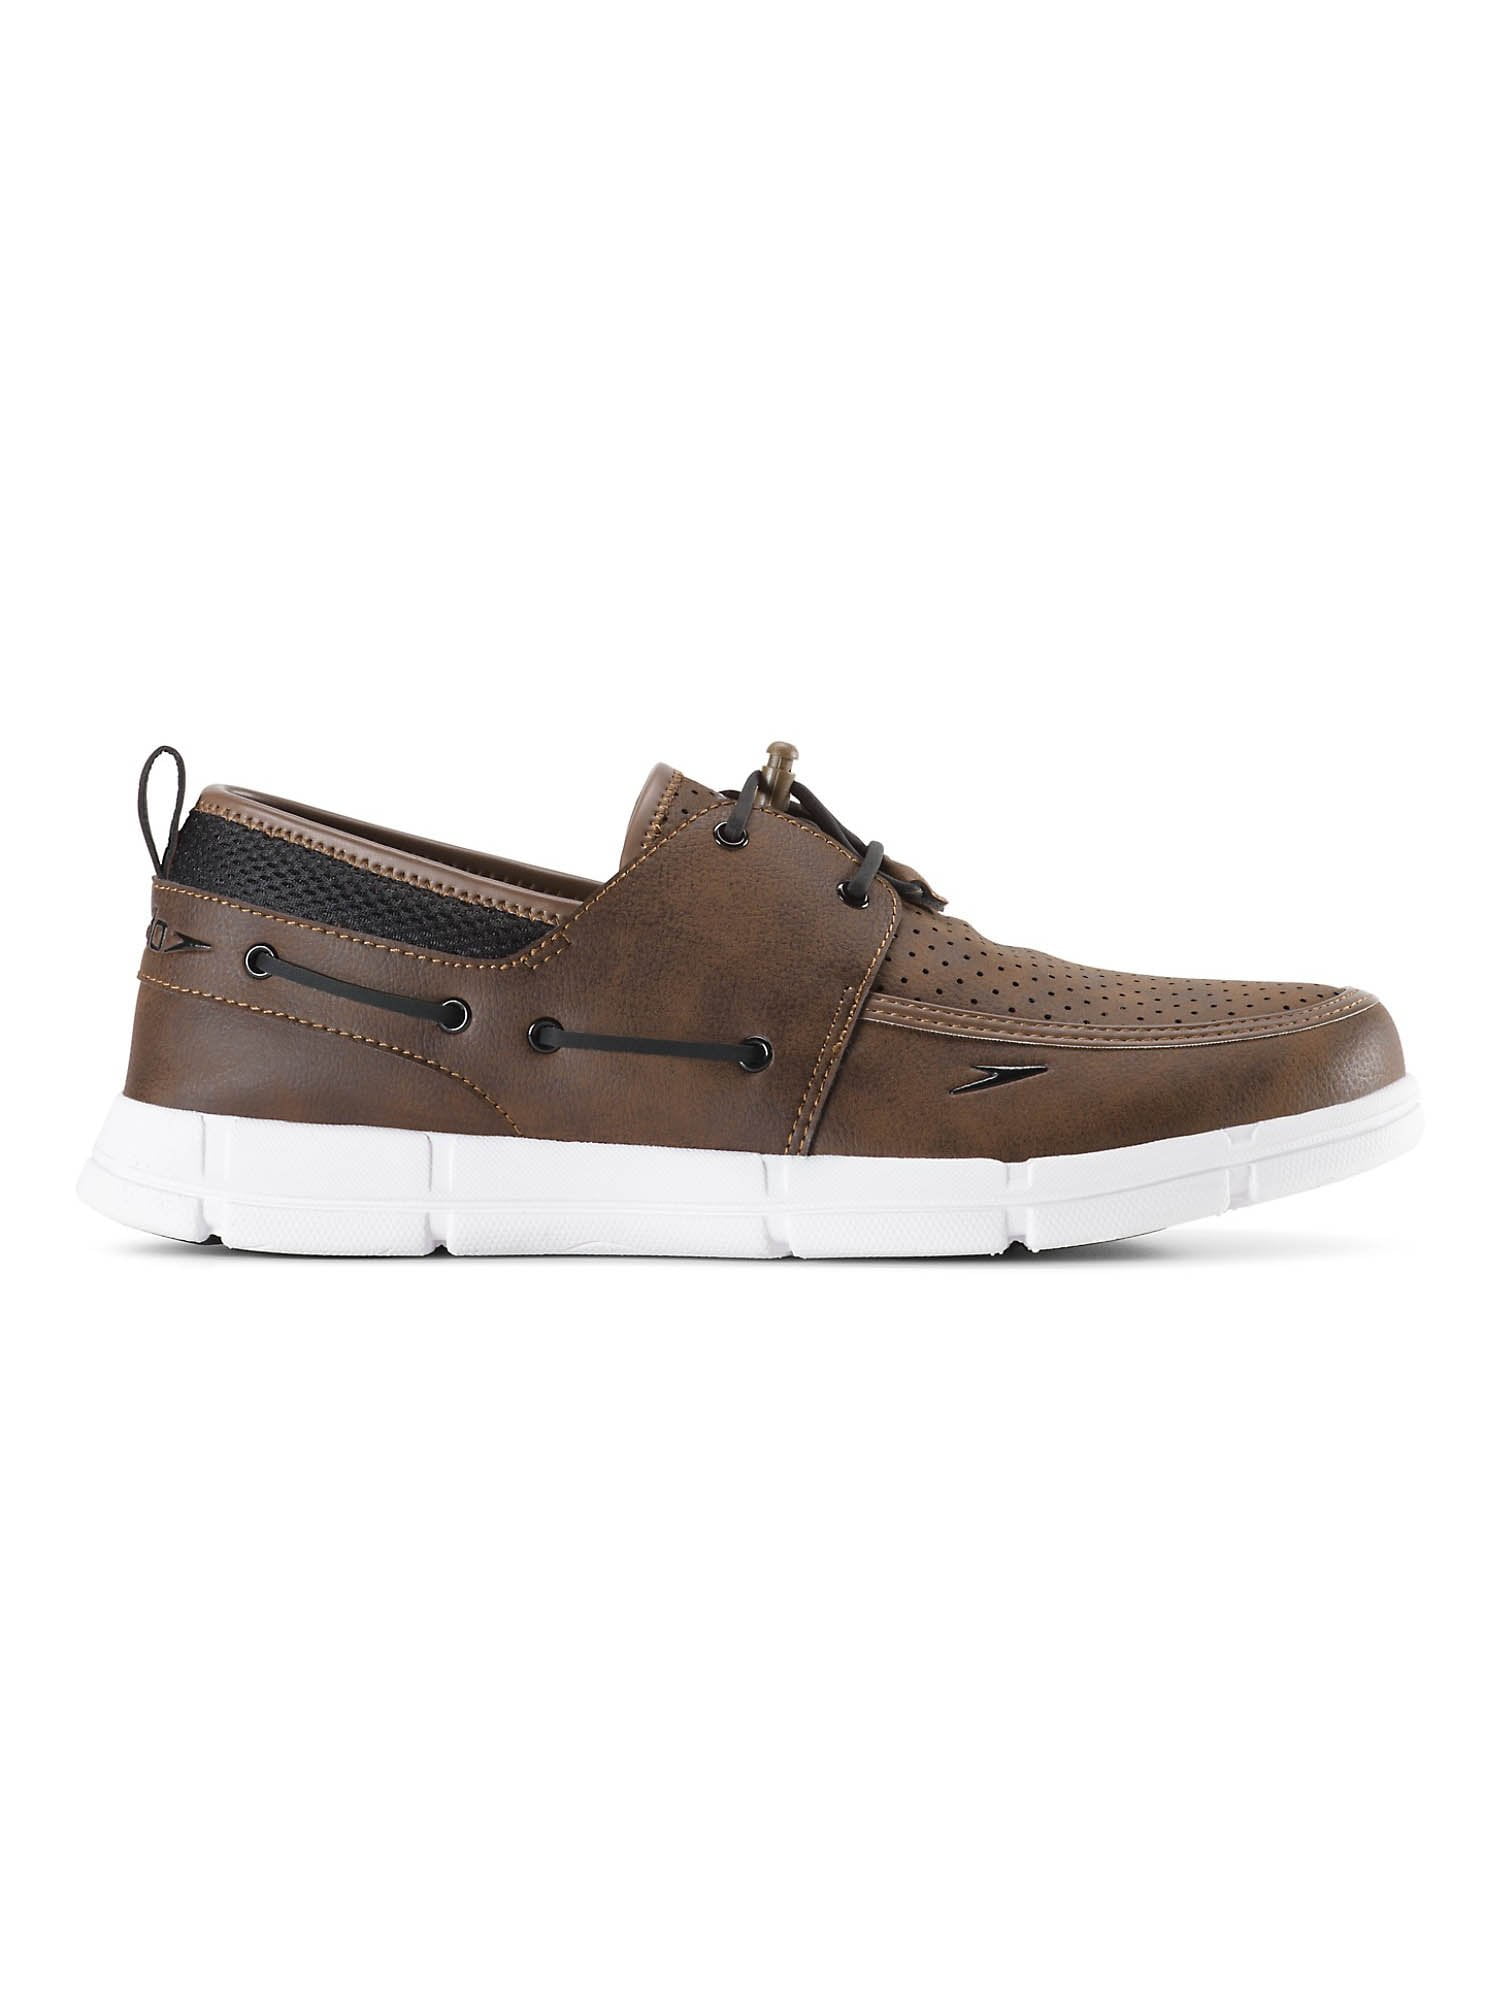 Speedo Mens Port Lightweight Breathable Water Boat Shoe - Brown or ...